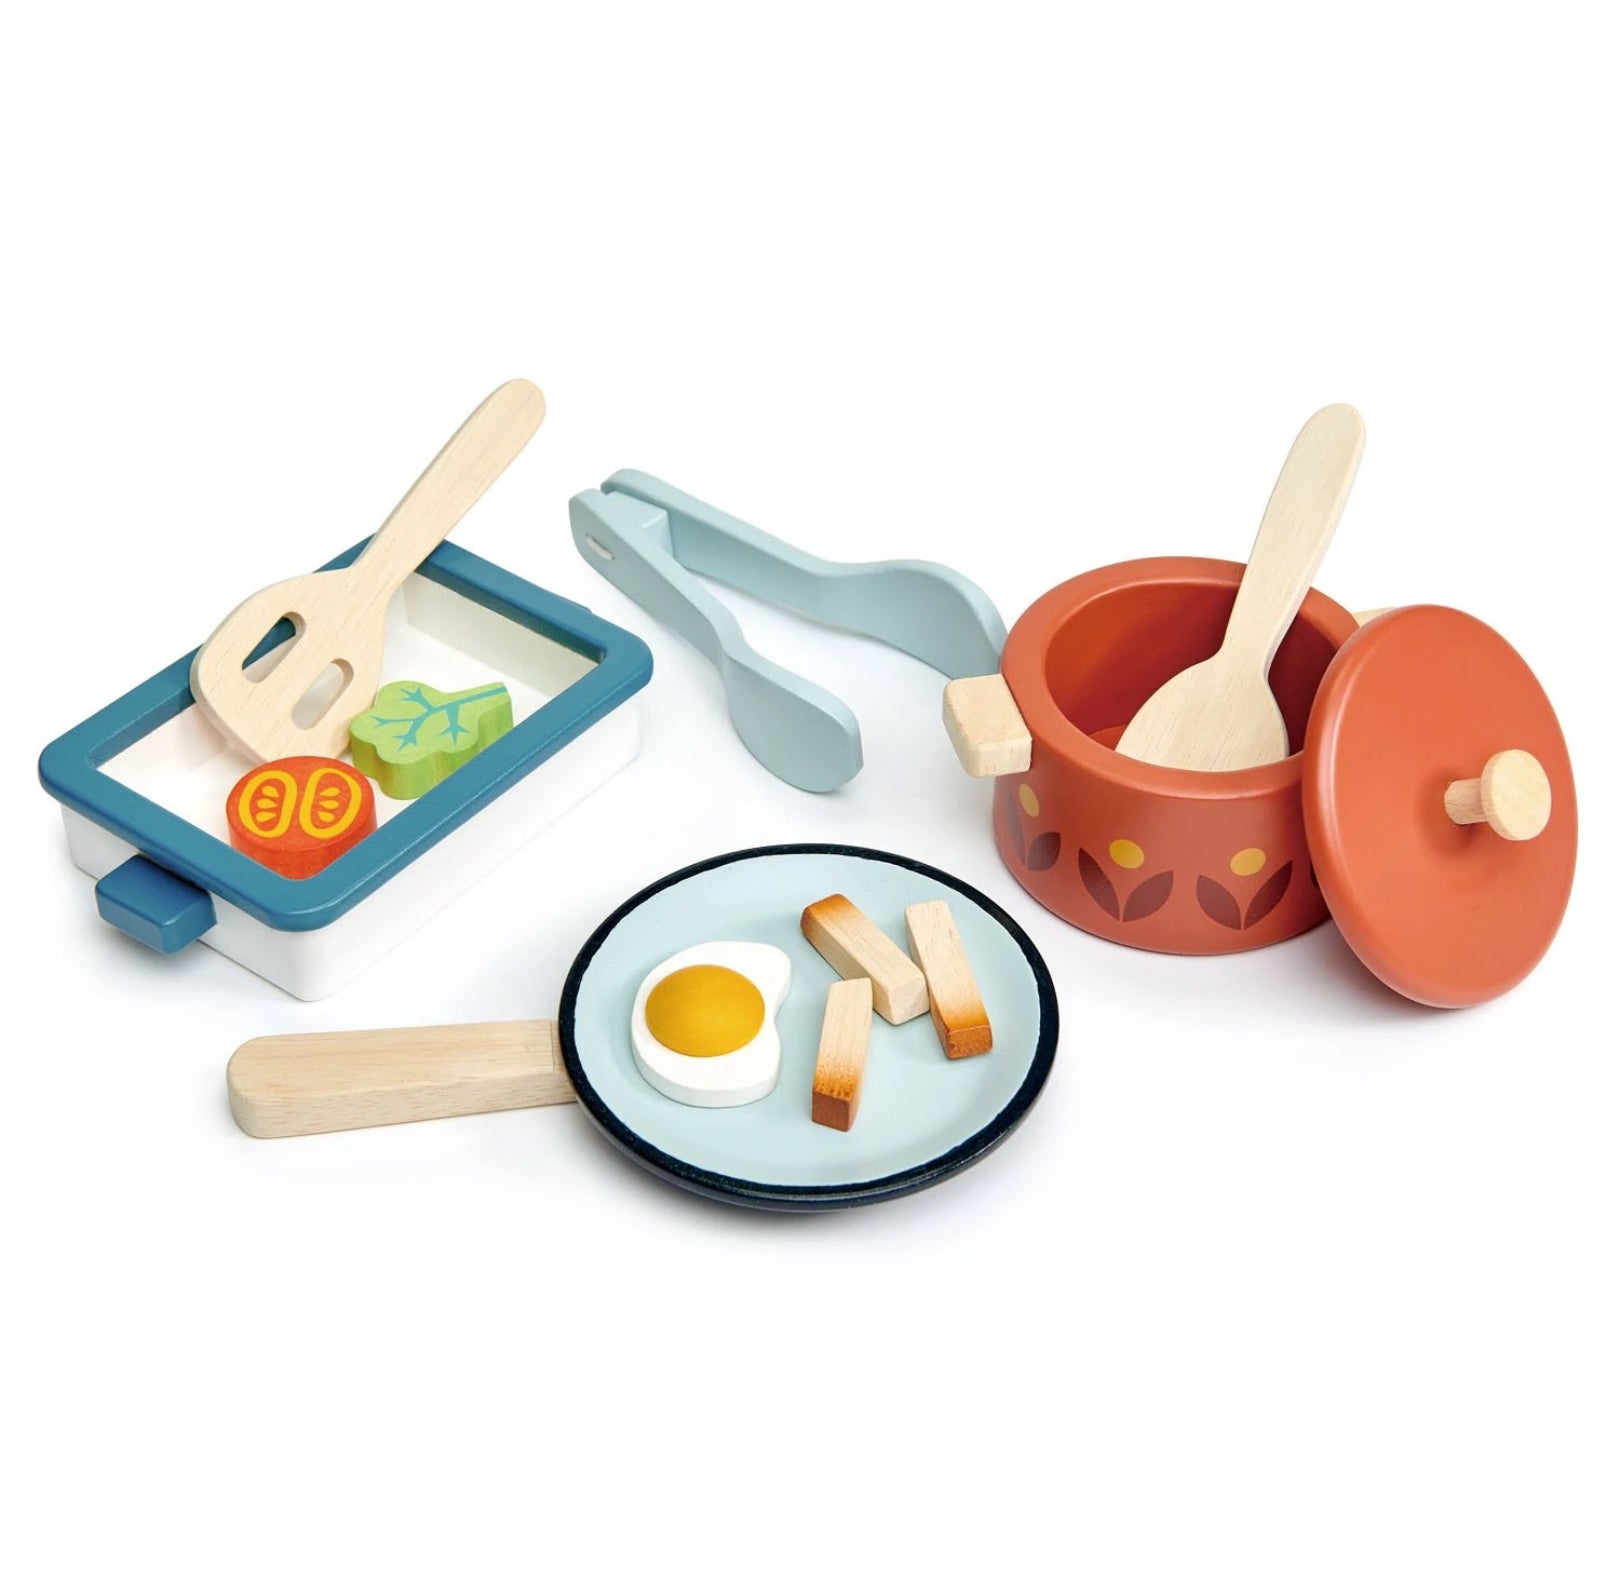 Tenderleaf Toys Pots and Pans Wooden Toy